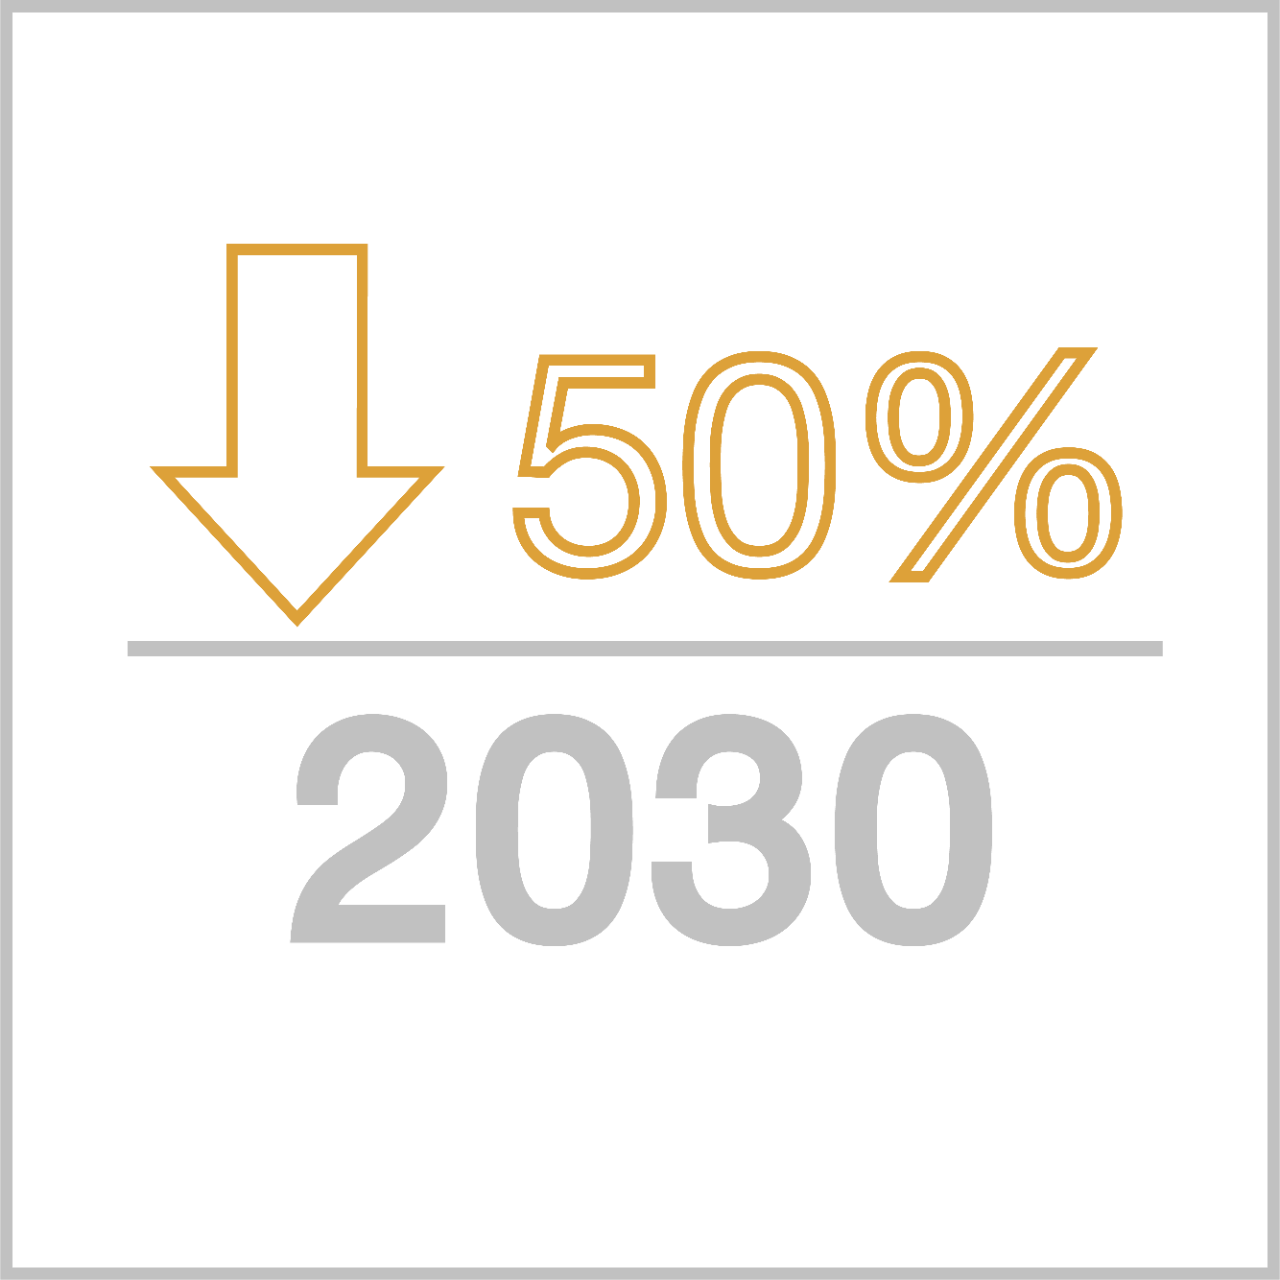 Down 50% by 2030